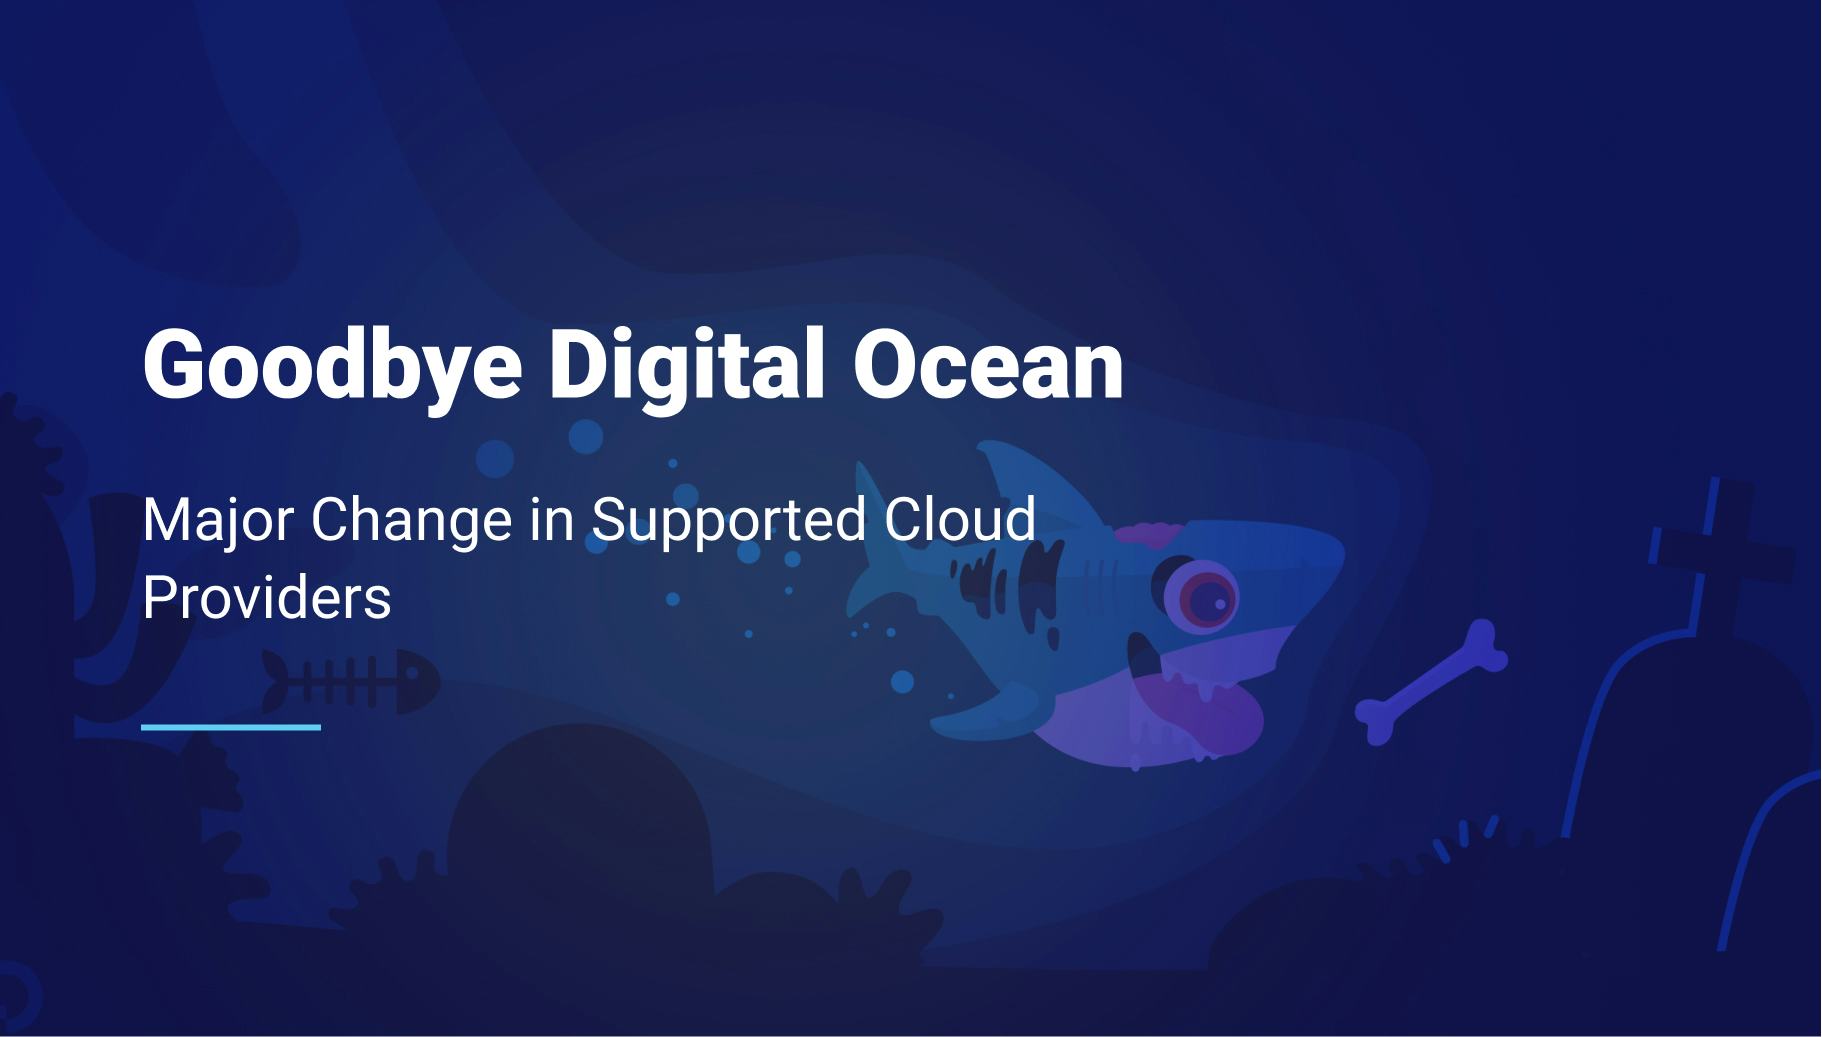 Say Goodbye to Digital Ocean: Major Change in Supported Cloud Providers - Qovery